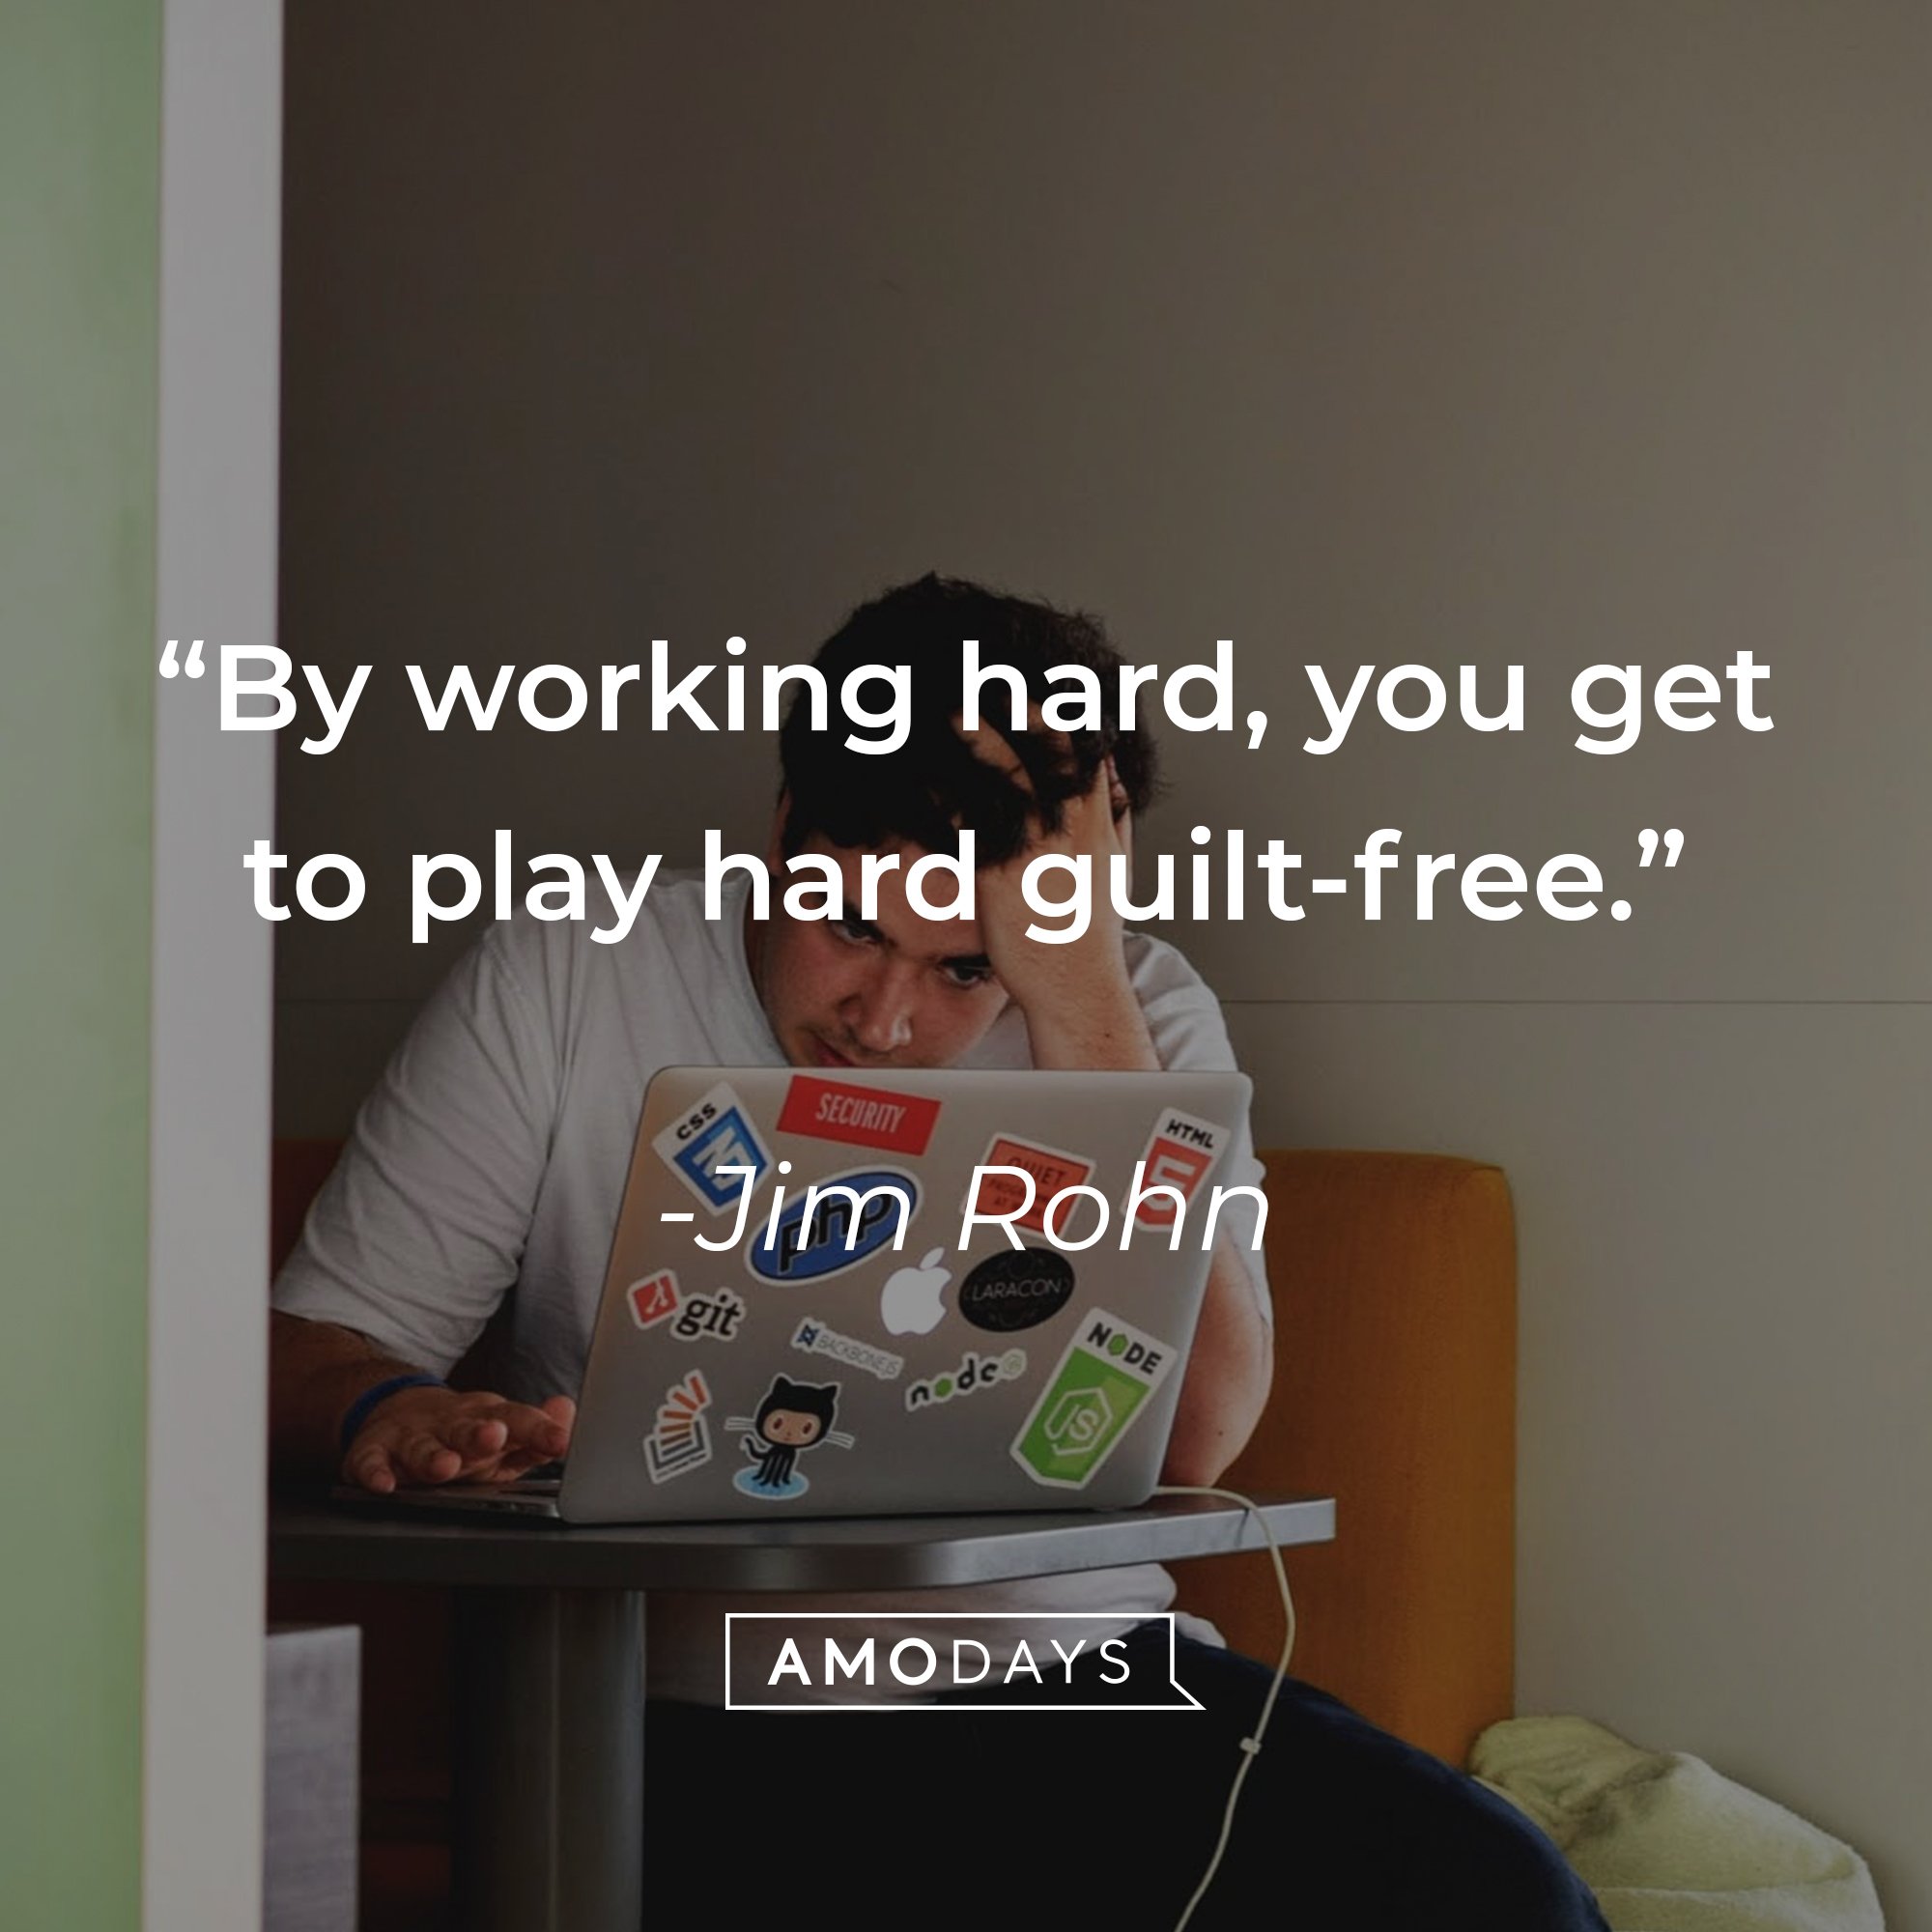 Jim Rohn's quote: "By working hard, you get to play hard guilt-free." | Image: AmoDays